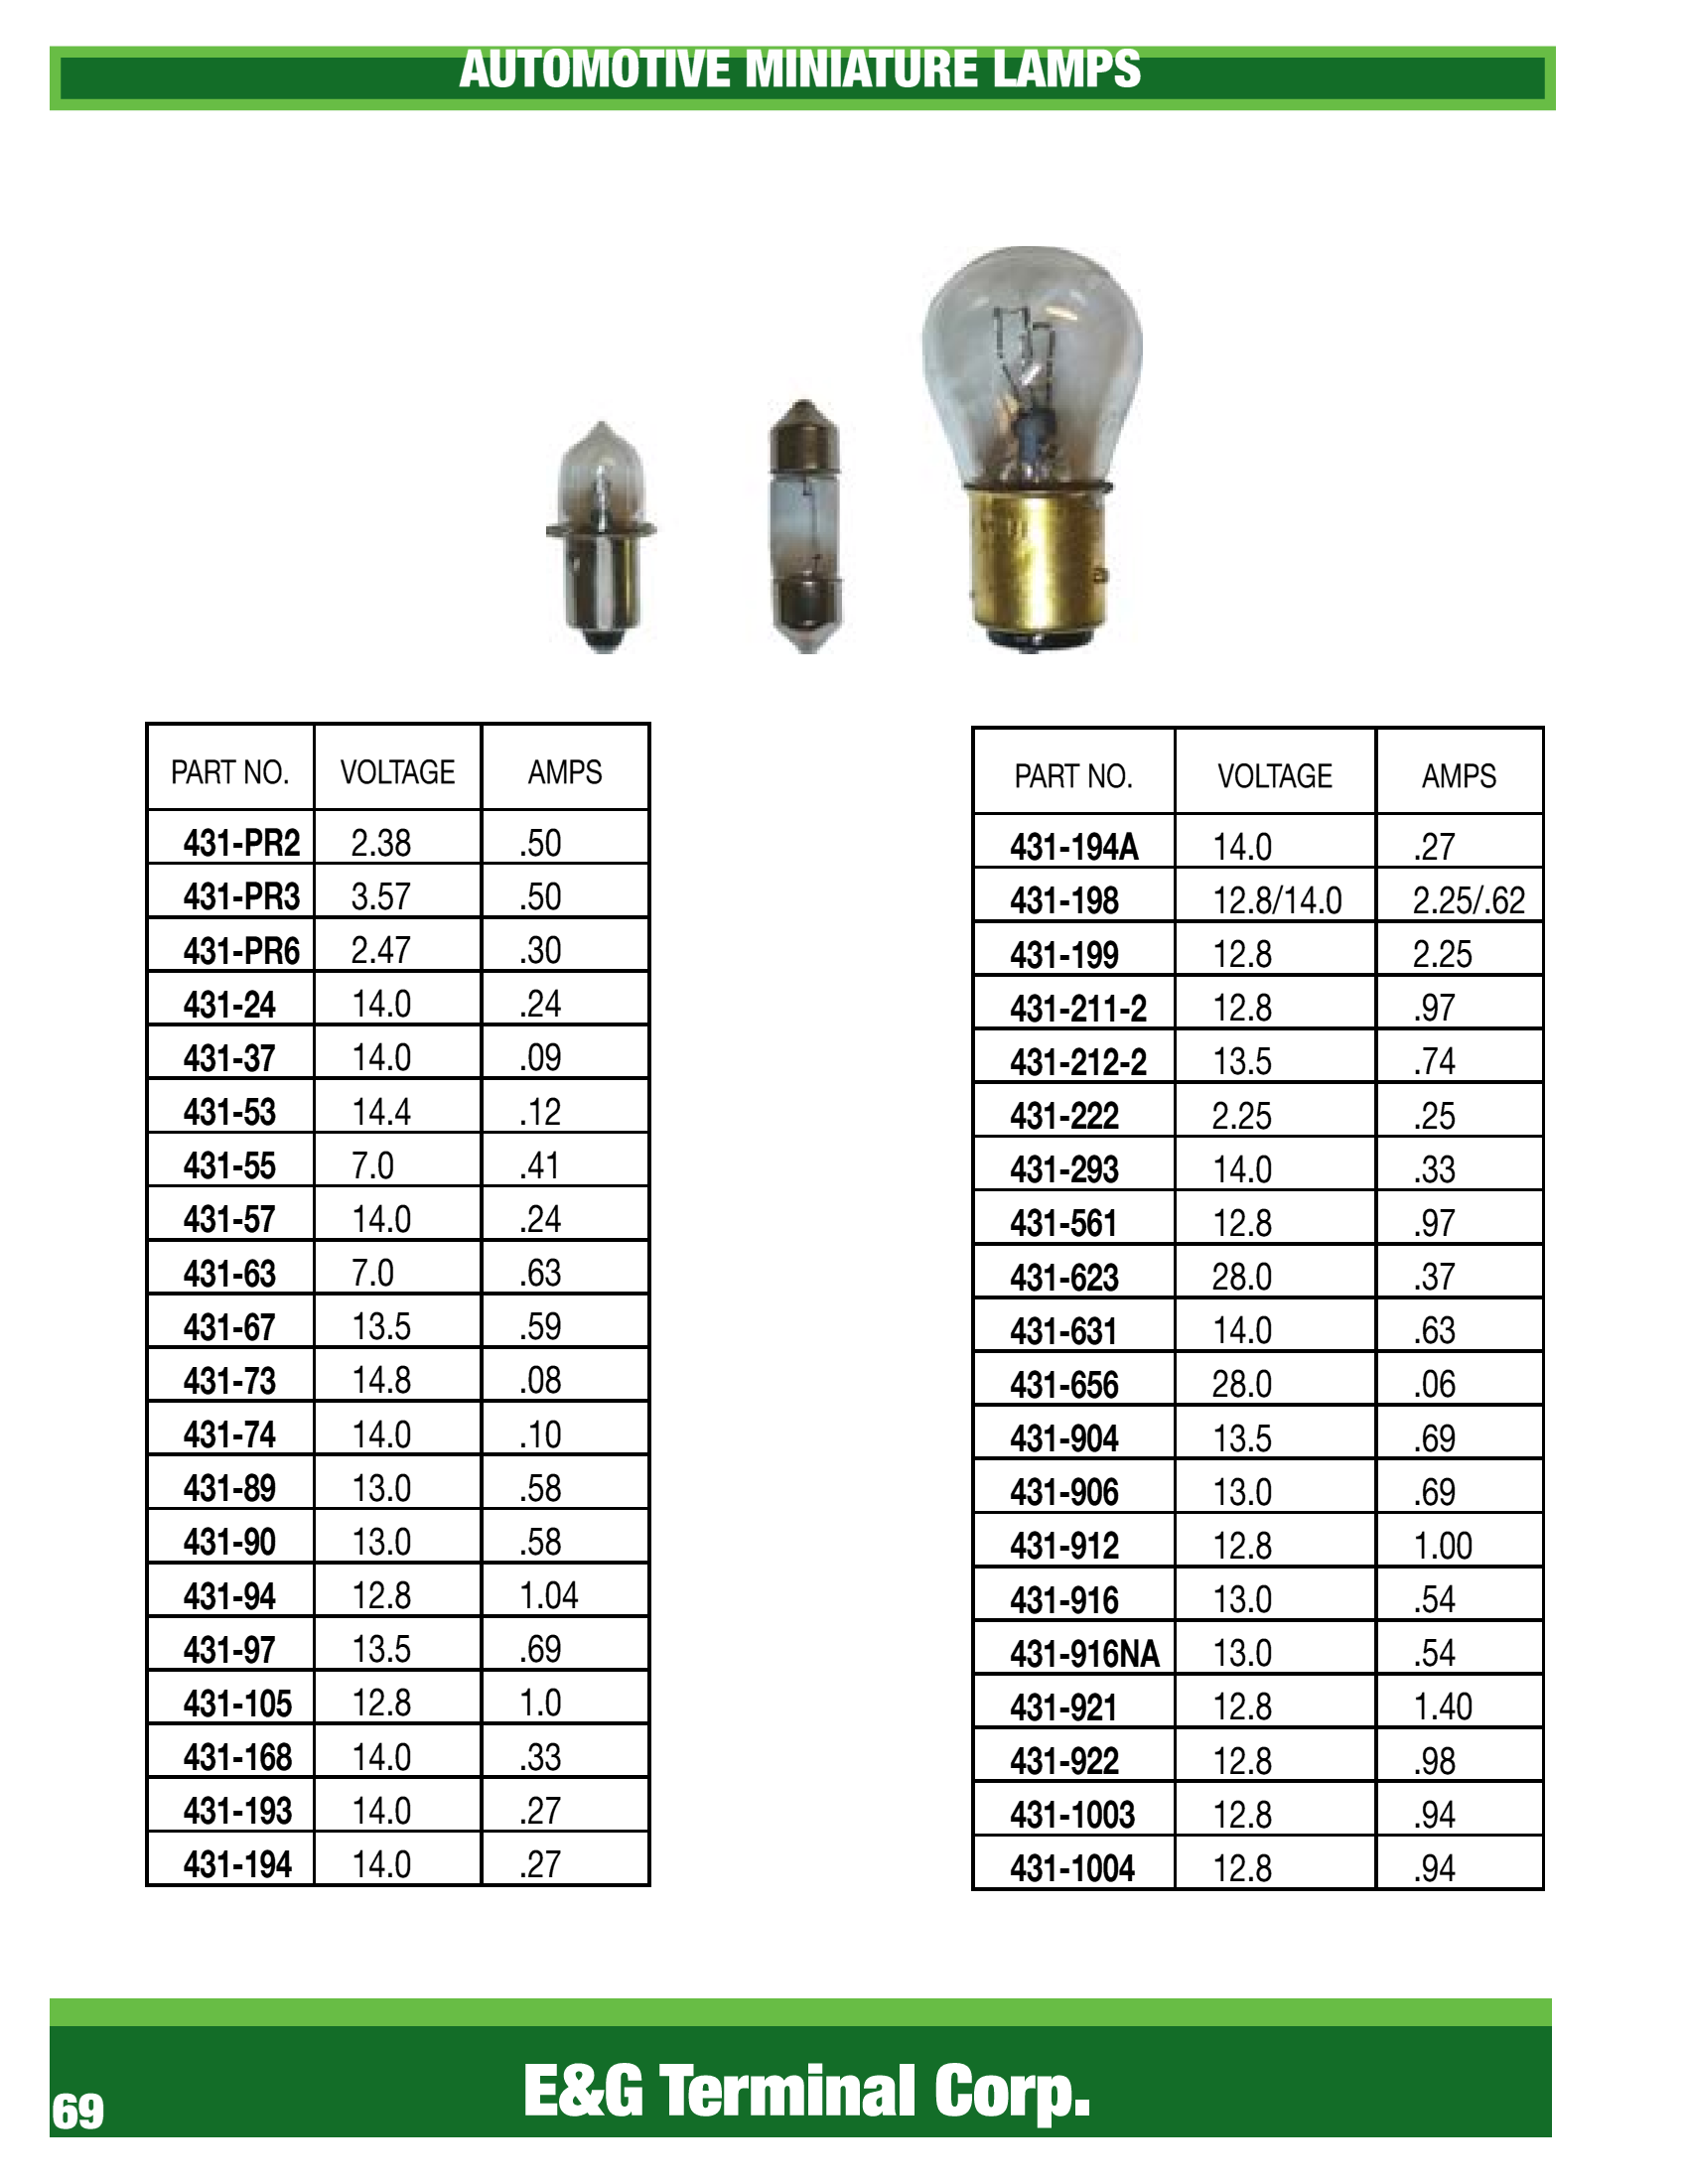 AUTOMOTIVE MINIATURE LAMPS	 VOLTAGE AMPS	431-PR2 2.38 .50	431-PR3 3.57 .50	431-PR6 2.47 .30	431-24 14.0 .24	431-37 14.0 .09	431-53 14.4 .12	431-55 7.0 .41	431-57 14.0 .24	431-63 7.0 .63	431-67 13.5 .59	431-73 14.8 .08	431-74 14.0 .10	431-89 13.0 .58	431-90 13.0 .58	431-94 12.8 1.04	431-97 13.5 .69	431-105 12.8 1.0	431-168 14.0 .33	431-193 14.0 .27	431-194 14.0 .27	431-194A 14.0 .27	431-198 12.8/14.0 2.25/.62	431-199 12.8 2.25	431-211-2 12.8 .97	431-212-2 13.5 .74	431-222 2.25 .25	431-293 14.0 .33	431-561 12.8 .97	431-623 28.0 .37	431-631 14.0 .63	431-656 28.0 .06	431-904 13.5 .69	431-906 13.0 .69	431-912 12.8 1.00	431-916 13.0 .54	431-916NA 13.0 .54	431-921 12.8 1.40	431-922 12.8 .98	431-1003 12.8 .94	431-1004 12.8 .94	ALL MINIATURE LAMPS ARE SOLD IN BOXES OF 10	431-1073 12.8 1.80	431-1076 12.8 1.80	431-1129 6.4 2.63	431-1141 12.8 1.44	431-1142 12.8 1.44	431-1154 6.3/7.0 2.63/.75	431-1155 13.5 .59	431-1156 12.8 2.1	431-1156DC 12.8 2.1	431-1156NA 12.8 2.1	431-1157 12.8/14.0 2.10/.59	431-1157NA 12.8/14.0 2.10/.59	431-1203 28.0 .71	431-1445 14.4 .13	431-1662 28.0 .93/.34	431-1683 28.0 1.02	431-1815 14.0 .20	431-1816 13.0 .33	431-1819 28.0 .04	431-1889 14.0 .27	431-1891 14.0 .24	431-1893 14.0 .33	431-1895 14.0 .27	431-2057 12.8/14.0 2.10/.48	431-2057NA 12.8/14.0 2.10/.48	431-3057 12.8/14.0 2.10/.48	431-3057NA 12.8/14.0 2.10/.48	431-3156 12.8 2.10	431-3156NA 12.8 2.10	431-3157 12.8/14.0 2.10/.59	431-3157NA 12.8/14.0 2.10/.59	431-DE3175 13.0 .77	431-3357 12.8/14.0 2.23/.59	431-3357NA 12.8/14.0 2.23/.59	431-4157NA 12.8 .59	431-4157K 12.8/14.0 2.23/.59	431-7440 13.8 1.85	431-7440NA 13.8 1.85	431-7443 13.5 1.85/.36	WORK / UTILITY LIGHTS	LED	 754-HD460063WFL	High output 6 LED Worklight	10-30VDC, 4-1/2" Round,	1300 lumens	body, S/S mounting hardware	 839-LDH361TC	High output 6 LED Replacement	lamp, PAR36 replaces 4411 type	sealed beam lamps, 10-30VDC,	4-1/2" Round, 1200 lumens,	cast aluminum body	 754-HD450063WFL	10-80VDC, 4-1/2" Round,	1300 lumens Higher voltage	rating allows use on forklifts and	 839-LDH362TC	1200 lumens	 754-HD500143WFL	Super High output 14 LED	Worklight	10-30VDC, 5" Round,	3000 lumens	 839-LDH363MTC	Magnetic base with cigarette	lighter plug and switch	1200 lumens.	Rubber housing, S/S mounting	hardware	INCANDESCENT	 816-507	Worklight, 4-3/4" round,	rubber housing	PAR36 4411 sealed beam	lamp, 12VDC	Zinc plated hardware	 839-5101M	Worklight, 4-3/4" round, rubber housing	Magnetic base with cigarette lighter	plug and switch	PAR36 4411 sealed beam lamp, 12VDC	HALOGEN	 816-506	Halogen Worklight	3" x 3" square lens, 12VDC	Replaceable H-3 55w bulb	Glass filled nylon housing	 757-90645B	4" x 6" rectangular lens, 12VDC	 754-HD260043WFL	High output 4 LED worklight	10-30 VDC 2-1/2" Square	900 Lumens, super compact,	S/S mounting hardware	HALOGEN SEALED BEAMS - 12 Volt	4 headlight systems 2 headlight systems	 SHAPE TYPE  SHAPE TYPE	430-H4651 Rectangular HI Beam 430-H6024 Round HI/Low Beam	430-H4656 Rectangular Low Beam 430-H6054 Rectangular HI/Low Beam	430-H5001 Round HI Beam	430-H5006 Round Low Beam	HALOGEN TYPE T-3 130VAC	 watts 	431-Q150T3 150W 3.1" OAL	431-Q250T3 250W 3.1" OAL	431-Q500T3 500W 4.7" OAL	 VOLTS WATTS	HALOGEN Type H1	757-78105 12V 55W	HALOGEN Type H3	757-78153 12V 35W	816-VH550 12V 55W	816-VH549 12V 100W	757-78140 12V 100W	757-78145 24V 70W	HALOGEN Type H4	757-78155 12V 60/55W	HALOGEN Type H7	757-78175 12V 55W	HALOGEN Type H11	431-H1155 12V 55W	REPLACEMENT LAMPS	HALOGEN Capsule Type	431-9003 12.8/12.8 60/55 Watt	431-9004 12.8/12.8 65/45 Watt	431-9005 12.8 65 Watt	431-9006 12.8 55 Watt	431-9007 12.8/12.8 65/55 Watt	431-9008 12.8/12.8 65/55 Watt	SEALED BEAMS 12 Volt	 430-4411	Round PAR 36 Flood	1300 lumens	1300 lumens Higher voltage	LED STROBE LIGHTS	 839-255H8TCL	7" Ultra High Output LED Strobe	Universal mount	Polycarbonate base	24 Selectable flash patterns	10-30VDC	 839-255H8TCLV	Vacuum magnetic mount	Corded cigarette lighter plug with	10-16VDC	 839-258HTDALAB	7" Ultra High Output Dual Color	Amber/Blue	LED Strobe	10-30VDC SAE Class 1	 839-203MVLA	4" LED Mini Strobe	28 Selectable flash patterns	 839-204MVL	5" LED Mini Strobe	Compact 2 bolt flange mount	 839-DLS306AA	Mini Comet 6 LED Amber Strobe Light	Super compact design	Gen IV High intensity LEDs	Surface or bracket mount	25 Selectable flash patterns	*Dual colors available on special order*	 839-DLX3A	Versastar 3 LED Amber Strobe Light	Gen IV High intensity LEDs Surface or bracket mount	21 Selectable flash patterns SAE Class I	10-30 VDC	 839-DLX4AA	Versastar 4 LED Amber Strobe Light	21 Selectable flash patterns SAE Class 1 10-30 VDC	 839-DLX6AA	Versastar 6 LED Amber Strobe Light	21 Selectable flash patterns SAE Class 1 10-30 VDC	 839-DLIteA	Low profile 6 LED H/O strobe	Super bright Gen V LEDs	Multiple selectable flash patterns	Rugged diecast aluminum base	Less than 1/2" thick SAE Class 1	GROMMET MOUNT LED STROBE LIGHTS	 839-DLXTHR4A	4" ROUND 6 LED AMBER STROBE	10-30 VDC Grommet Included	*Other colors available*	 839-DLXTHU4A	6" OVAL 6 LED AMBER STROBE	AMBER WARNING LIGHTS	105 E&G Terminal Corp.	LED HIGH OUTPUT MINI BARS	 839-9018LEDA	LED Ultra High Output Mini Light Bar	72 Generation IV High Intensity LEDs	Linear parabolic lenses for max visibility	35 Selectable flash patterns Clear dome/Amber LEDs	Extruded aluminum base 10-16VDC	 839-9016LEDA	LED High Output Mini Light Bar	M-TECH PLUS LEDs	Parabolic reflector for max visibility	20 Selectable flash patterns	Clear dome/Amber LEDs	Extruded aluminum base 12-24VDC	 839-9016LEDMA	Magnetic mount with corded cigarette lighter plug	20 Selectable flash patterns Clear dome/Amber LEDs	 839-9016LEDVA	Vacuum magnetic mount with corded cigarette lighter plug	 839-9100LEDA	LED High Output Mini Light Bar M-TECH LEDs	Amber dome/Clear LEDs Polycarbonate base	Aerodynamic contoured lens design 12-24VDC	 839-9100LEDMA	M-TECH LEDs Parabolic reflector for max visibility	20 Selectable flash patterns Polycarbonate base	Aerodynamic contoured lens design 12-16VDC	Amber dome/Clear LEDs	 839-9100LEDVA	AMBER WARNING LIGHTS	EXTREME DUTY XENON STROBE LIGHTS	 839-242CGL1A	7" Extreme Duty Xenon Strobe	Quad Flash SAE Class 1	aluminum base	19.5 Joules 12-24VDC	* Also Available In Blue *	 839-242SGL1A	5" Extreme Duty Xenon Strobe	 839-242SLMA	Magnetic mount	Corded cigarette lighter plug with On/Off switch	19.5 Joules 12VDC	HEAVY DUTY XENON MINI STROBE LIGHTS	 839-201ZA	4" Xenon Mini Strobe	Single Flash SAE Class 3	3 Joules 12VDC	 839-201ZMQ	Quad Flash SAE Class 3	Corded cigarette lighter plug and	eyeshield included	3.75 Joules 12VDC	 839-203MVA	Universal flange mount	1.5 Joules 10-72VDC	 839-204MVA	Compact 2-bolt flange mount	1.75 Joules 10-110VDC	HEAVY DUTY XENON STROBE LIGHTS	 839-255TC	7" Heavy Duty Xenon Strobe	Double Flash SAE Class 2	10 Joules 12-48VDC	 839-255TS	5" Heavy Duty Xenon Strobe	107 E&G Terminal Corp.	HIGH OUTPUT XENON STROBE MINI BARS	 839-9200SQA	High Output Xenon Mini Light Bar	Dual high intensity strobes	Twin internal V-mirrors	Quad Flash	17.5 joules	12-24VDC	 839-9200SMQA	12VDC	HALOGEN ROTATOR MINI BARS	 839-9200HWYA	Halogen Mini Bar	Dual rotators with internal V-mirror, 160 FPM	 839-9200HMWYA	 839-9200HVWYA	Vacuum magnetic mount with	corded cigarette lighter plug	LED TRAFFIC DIRECTORS	 839-TDDL15-36-1	36" High Output LED Traffic Director	24 Generation IV High Intensity Starburst LEDs	Heavy duty extruded aluminum housing	Control box with LED Pattern Display	15' of cable and mounting brackets included	10-16 VDC Uses less than 3 Amps	7 Flash patterns:	Left Arrow, Right Arrow, Center Out, Warning,	Fast, Dim, Alternating	Weather resistant design	 839-TDDL15-47-1	47" High output LED Traffic Director	 839-TDDL15-47-30	30' of cable and mounting brackets included	CONTROL	Pattern Display	109 E&G Terminal Corp.	PETERSON MANUFACTURING	Stop, Turn, Tail & BACKUP	816-826KA7	LED 4" AMBER	Turn Signal KIT	7 Diode	Grommet &	Standard PL3 plug	816-826KR7	LED 4" RED	Stop/Turn/Tail KIT	7 Diode	816-826A7	LED 4"AMBER	Turn Signal	LAMP ONLY	PL3 plug	816-826R7	Stop/Turn/Tail	816-826C7	LED 4" CLEAR	Backup/Utility	816-827R	1 High Output Diode	816-42618	Rubber mounting grommet	816-431491	Straight PL3 Plug for	Stop/Tail/Turn Lamps	816-42609	Steel mounting bracket for	4" round grommet mount	lamps	816-42149	Right Angle PL3	2-Wire Plug for Turn Signal	816-421491	Right Angle PL3 Plug for	816-43149	Straight PL3	816-821KA7	LED 6" OVAL AMBER	816-821KR7	LED 6" OVAL RED	816-821A7	816-821R7	816-351A	Mid/Turn Signal	10 Diode	816-821C7	LED 6" OVAL CLEAR	816-42118	816-42109	6" oval grommet mount	111 E&G Terminal Corp.	Clearance & Marker LAMPs 9-16VDC	2-1/2" Round	816-162A 2-1/2" Round LED Marker Lamp, Amber, 3 Diode	816-162R 2-1/2" Round LED Marker Lamp, Red, 3 Diode	(Requires 14218 Grommet and 16249 Plug, Not Included)	816-162KA 2-1/2" Round LED Marker Lamp Kit, Amber, 3 Diode	816-162KR 2-1/2" Round LED Marker Lamp Kit, Red, 3 Diode	(Kits include rubber grommet and plug)	816-163A 2-1/2" Round LED Marker Lamp, PC Rated, Amber, 5 Diode	816-163R 2-1/2" Round LED Marker Lamp, PC Rated, Red, 5 Diode	(Requires 14318 Grommet and 16249 Plug, Not Included)	816-173A 2-1/2" Round LED Marker Lamp, Reflectorized, Amber, 4 Diode	816-173R 2-1/2" Round LED Marker Lamp, Reflectorized, Red, 4 Diode	(Requires 14218 Grommet and 14249 Plug, Not Included)	2" Round	816-164A 2" Round LED Marker Lamp, Amber, 3 Diode	816-164R 2" Round LED Marker Lamp, Red, 3 Diode	(Requires 14618 Grommet and 16249 Plug, Not Included)	816-164KA 2" Round LED Marker Lamp Kit, Amber, 3 Diode	816-164KR 2" Round LED Marker Lamp Kit, Red, 3 Diode	816-165A 2" Round LED Marker Lamp, PC Rated, Amber, 5 Diode	816-165R 2" Round LED Marker Lamp, PC Rated, Red, 5 Diode	816-203A 2-1/2" Rectangular LED Marker Lamp, PC Rated, Amber, 2 Diode	816-203R 2-1/2" Rectangular LED Marker Lamp, PC Rated, Red, 2 Diode	(Requires 15010 Bracket & 14249 Plug, NOT INCLUDED)	816-161A 4" Rectangular LED Marker Lamp, Amber, 4 Diode	816-161R 4" Rectangular LED Marker Lamp, Red, 4 Diode	(Requires 15409K Bracket, NOT INCLUDED)	816-161KA 4" Rectangular LED Marker Lamp, Amber, 4 Diode	816-161KR 4" Rectangular LED Marker Lamp, Red, 4 Diode	(Kits include 816-15409K Mounting Bracket)	816-160KA 4-1/2" Rectangular Thinline LED Marker Lamp Kit, 3 Diode, Amber	816-160KR 4-1/2" Rectangular Thinline LED Marker Lamp Kit, 3 Diode, Red	(Mounts on 3" centers, plug included)	816-1603R 6" on center mtg, Alum. base (Hardwired leads, no plug required)	816-180A 4" Rectangular LED Marker Lamp, Reflectorized, Amber, 6 Diode	816-180R 4" Rectangular LED Marker Lamp, Reflectorized, Red, 6 Diode	(Mounts on 3" centers, Hardwired leads, no plug required)	816-188A 6" Rectangular LED Marker Lamp, Reflectorized, Amber, 4 Diode	816-188R 6" Rectangular LED Marker Lamp, Reflectorized, Red, 4 Diode	(Mounts on 4.80" centers, Hardwired leads, no plug required)	816-171A 3/4" Round LED Marker Lamp, Amber, Flush Mount, 1 Diode	816-171R 3/4" Round LED Marker Lamp, Red, Flush Mount, 1 Diode	(Hardwired leads, Includes mounting grommet)	816-177A 3/4" Round LED Marker Lamp, Dome Head, Amber, 1 Diode	816-177R 3/4" Round LED Marker Lamp, Dome Head, Red, 1 Diode	(Hardwired leads, Requires 177-18 Grommet, NOT INCLUDED)	816-177-18 Mounting grommet for 816-177A or 816-177R	3/4"	17" Rectangular	LED Identification	Bar, Red, 9 Diode	113 E&G Terminal Corp.	License, BACKUP & Utility LAMPs 9-16VDC	816-296C 4" LED License Light, black polycarbonate housing, 2 Diode	(Hardwired leads, 2 ea. 3/16" mounting holes on 3-1/2" centers)	816-298C 1-1/2" Round LED License Light,	Chrome polycarbonate housing, 4 Diode	(Hardwired leads, snap-in mounting, Requires 1-1/4" diameter hole)	816-171C 3/4" Round LED Utility Light, Flush mount, 2 Diode	(Hardwired leads, grommet included, requires 3/4" diameter hole)	816-153CMV 2-1/2" Rectangular LED Utility Light, 1 Diode, 9-32VDC	(Hardwired leads, uses any 150 series mounting bracket, NOT INCLUDED)	816-581C 6" Rectangular LED Utility Light, 6 Diode	(Sold per pair, mounting hardware and wiring included)	816-826C7 4" Round LED Backup/Utility Light, 7 Diode	(Requires 42618 mounting grommet & 43149 plug, NOT INCLUDED)	816-821C7 6" Oval LED Backup/Utility Light, 7 Diode	(Requires 42118 mounting grommet & 42149 plug, NOT INCLUDED)	816-426KR	4" RED	816-431a	4" AMBER	816-431R	816-415	4" CLEAR	115 E&G Terminal Corp.	816-421KR	6" OVAL RED	816-421a	6" OVAL AMBER	816-421R	816-416	6" OVAL CLEAR	COMBINATION Stop, Turn, & Tail LAMPS	816-445	Stop/Turn/Tail/Backup Lamp	5-1/2" x 6-1/2"	3 wire universal harness	3 ea. 1/4-20 Mounting studs on 2" centers	816-440	Stop/Turn/Tail Lamp	4-3/4" Square	2-wire universal harness	2 ea. 1/4-20 Mounting studs on 2" centers	816-440L	Stop/Turn/Tail/License Lamp	816-428	3-3/4" Round	117 E&G Terminal Corp.	Clearance & Marker LAMPs	816-143A 2-1/2" Round Marker Lamp, Reflectorized, Amber	816-143R 2-1/2" Round Marker Lamp, Reflectorized, Red	(Requires 14218 Mounting Grommet, and 14249 plug, NOT INCLUDED)	816-146A 2" Round Marker Lamp, Amber	816-146R 2" Round Marker Lamp, Red	(Requires 14618 Mounting Grommet, and 14249 plug, NOT INCLUDED)	816-150A 2-1/2" Rectangular Marker Lamp, Amber	816-150R 2-1/2" Rectangular Marker Lamp, Red	(Requires 15010 Mounting Base, and 14249 plug, NOT INCLUDED)	816-1503R	17" Rectangular 3 Lamp Identification Bar, Red,	816-154A 4" Rectangular Marker Lamp, Amber	816-154R 4" Rectangular Marker Lamp, Red	(Requires 15409K Pre-wired Base, NOT INCLUDED)	816-138A 4" Rectangular Double Bullseye Marker Lamp, Amber,	1 Wire, Grounds Thru Base	816-138R 4" Rectangular Double Bullseye Marker Lamp, Red,	816-135A 4" Oblong Marker Lamp, Reflector, Amber,	816-135R 4" Oblong Marker Lamp, Reflector, Red,	816-123A 5" Rectangular Armored Marker Lamp, Amber,	816-123R 5" Rectangular Armored Marker Lamp, Red,	(Heavy duty cast aluminum construction)	License Plate & Utility LAMPs	816-434 2-1/2" Rectangular Utility/Courtesy Light, Bright Metal Housing	1 Wire	816-435	1-1/2" Round Hooded License/Utility Light, Chrome Plated	816-436 3" Rectangular License Light, Gray polycarbonate base	816-436B	3" Rectangular License Light with license plate bracket	Gray polycarbonate base	816-437 2" Recessed License/Utility Light, Chrome Plated Housing	816-438 1-1/2" License/Utility Light, Chrome Plated Housing	Snap-in mounting requires 1-1/4" hole, 1 Wire, Grounds Thru	Base	816-150C 2-1/2" Rectangular License/Utility Light	(Requires 150 series mounting bracket & 14249 plug, NOT INCLUDED)	816-154C 4" Rectangular License/Utility Light	(Requires15409K mounting bracket, NOT INCLUDED)	Triangular Emergency Roadside Kit	 816-449	Conspicuity & Reflectors Triangles & SMV Signs	One-piece triangles feature “living hinges”; foldout tabs lock together.	Heavy base and non-skid tabs withstand 40 mph wind.	Bright fluorescent orange for daytime visibility.	119 E&G Terminal Corp.	GROMMETS & MOUNTING BRACKETS	816-14618K	2" Recessed mounting grommet kit. Requires 2-5/16"	cutout. Fits all 2" grommet mounting lamps.	816-14618 grommet only	816-14218 2-1/2" Flush mounting grommet. Requires 3" cutout.	Fits all 2-1/2" grommet mounting lamps	816-14218K 2-1/2" Flush mounting grommet kit. Requires	3" cutout. Includes mounting grommet and pigtail	816-14318 2-1/2" Recessed mounting grommet. Requires	2-25/32" cutout. Fits all 2-1/2" grommet mounting lamps	816-14318K 2-1/2" Recessed mounting grommet kit Requires	2-25/32" cutout. Includes mounting grommet and pigtail	816-177-18 3/4" Flush mounting grommet. Requires 3/4" cutout.	Fits all 3/4" grommet mounting lamps	816-42618 4" Flush mounting grommet. Requires 4-1/2" cutout.	Fits all 4" grommet mounting lamps	816-42118 6" Oval flush mounting grommet. 2-1/2" x 6-3/4"	oval cutout required. Fits all 6" grommet mounting lamps	816-15010 Chrome mounting bracket for 2-1/2" rectangular lamps	(Requires 14249 plug not included)	816-15409K Mounting bracket for 4" rectangular lamps	816-150141	License light bracket for 2-1/2" rectangular lamps	Black polycarbonate housing	816-42109 Steel L-bracket for 6" oval grommet mount lamps	816-42609 Steel L-bracket for 4" round grommet mount lamps	816-42809 Steel universal license plate bracket	2 ea. 5/16" mounting holes on 2" centers	816-16249 Right angle 2-wire triple seal pigtail for marker lamps	816-14249 Right angle 2-wire pigtail for marker or utility lamps	816-42149 Right Angle 2-wire plug for turn signal or backup lamps	816-43149 Straight 2-wire plug for turn signal or backup lamps	816-421491 Right Angle 3-wire plug for stop/turn/tail lamps	816-431491 Straight 3-wire plug for stop/turn/tail lamps	816-41749 Straight 3-wire AMP style pigtail for stop/turn/tail lamps	816-417491 Straight 3-wire adapter, AMP male to PL3 female	Adapts existing PL3 plug to AMP style lamps	816-417493 Straight 3-wire adapter, PL3 male to AMP female	Adapts existing AMP plug to PL3 style lamps